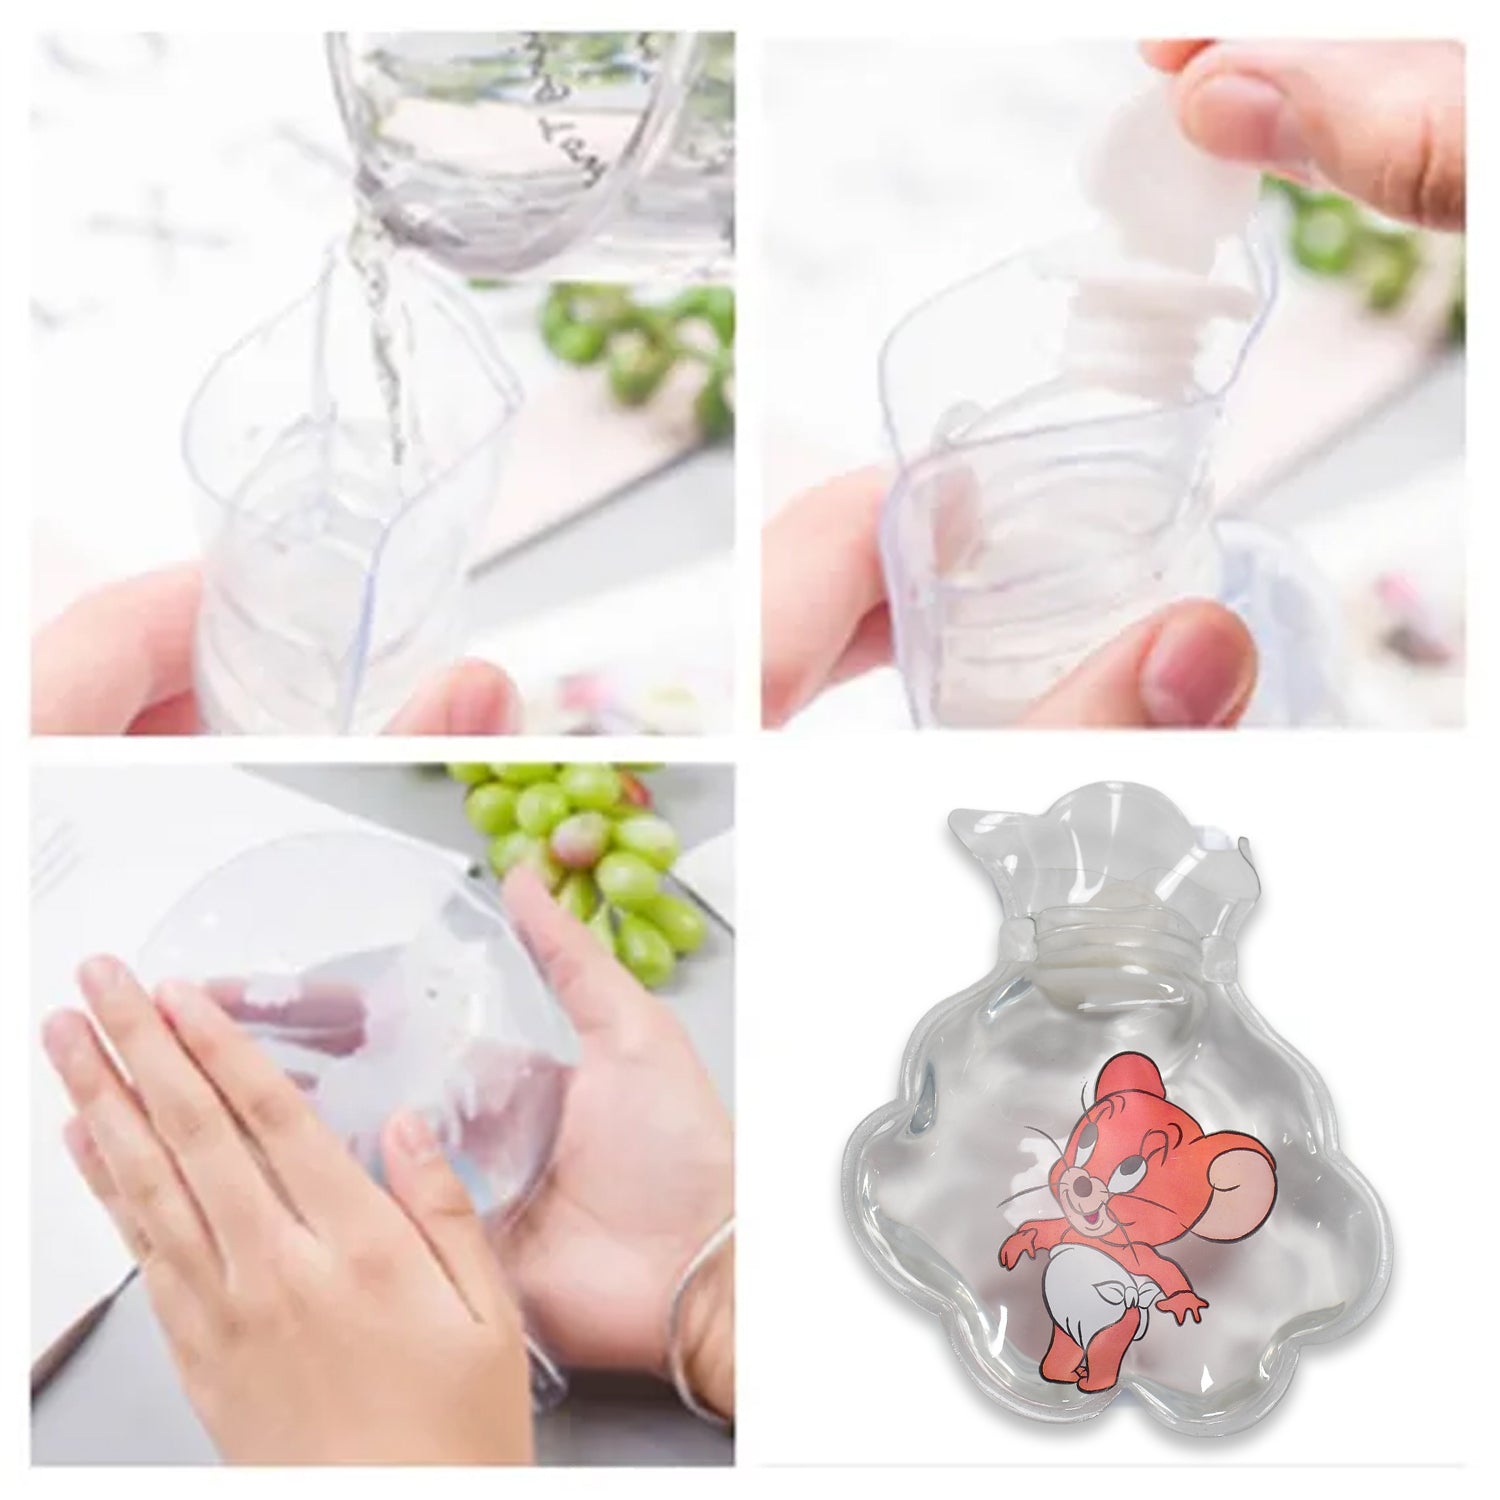 6542 MIX TRANSPARENT MULTI DESIGN SMALL HOT WATER BAG WITH COVER FOR PAIN RELIEF, NECK, SHOULDER PAIN AND HAND, FEET WARMER, MENSTRUAL CRAMPS. DeoDap